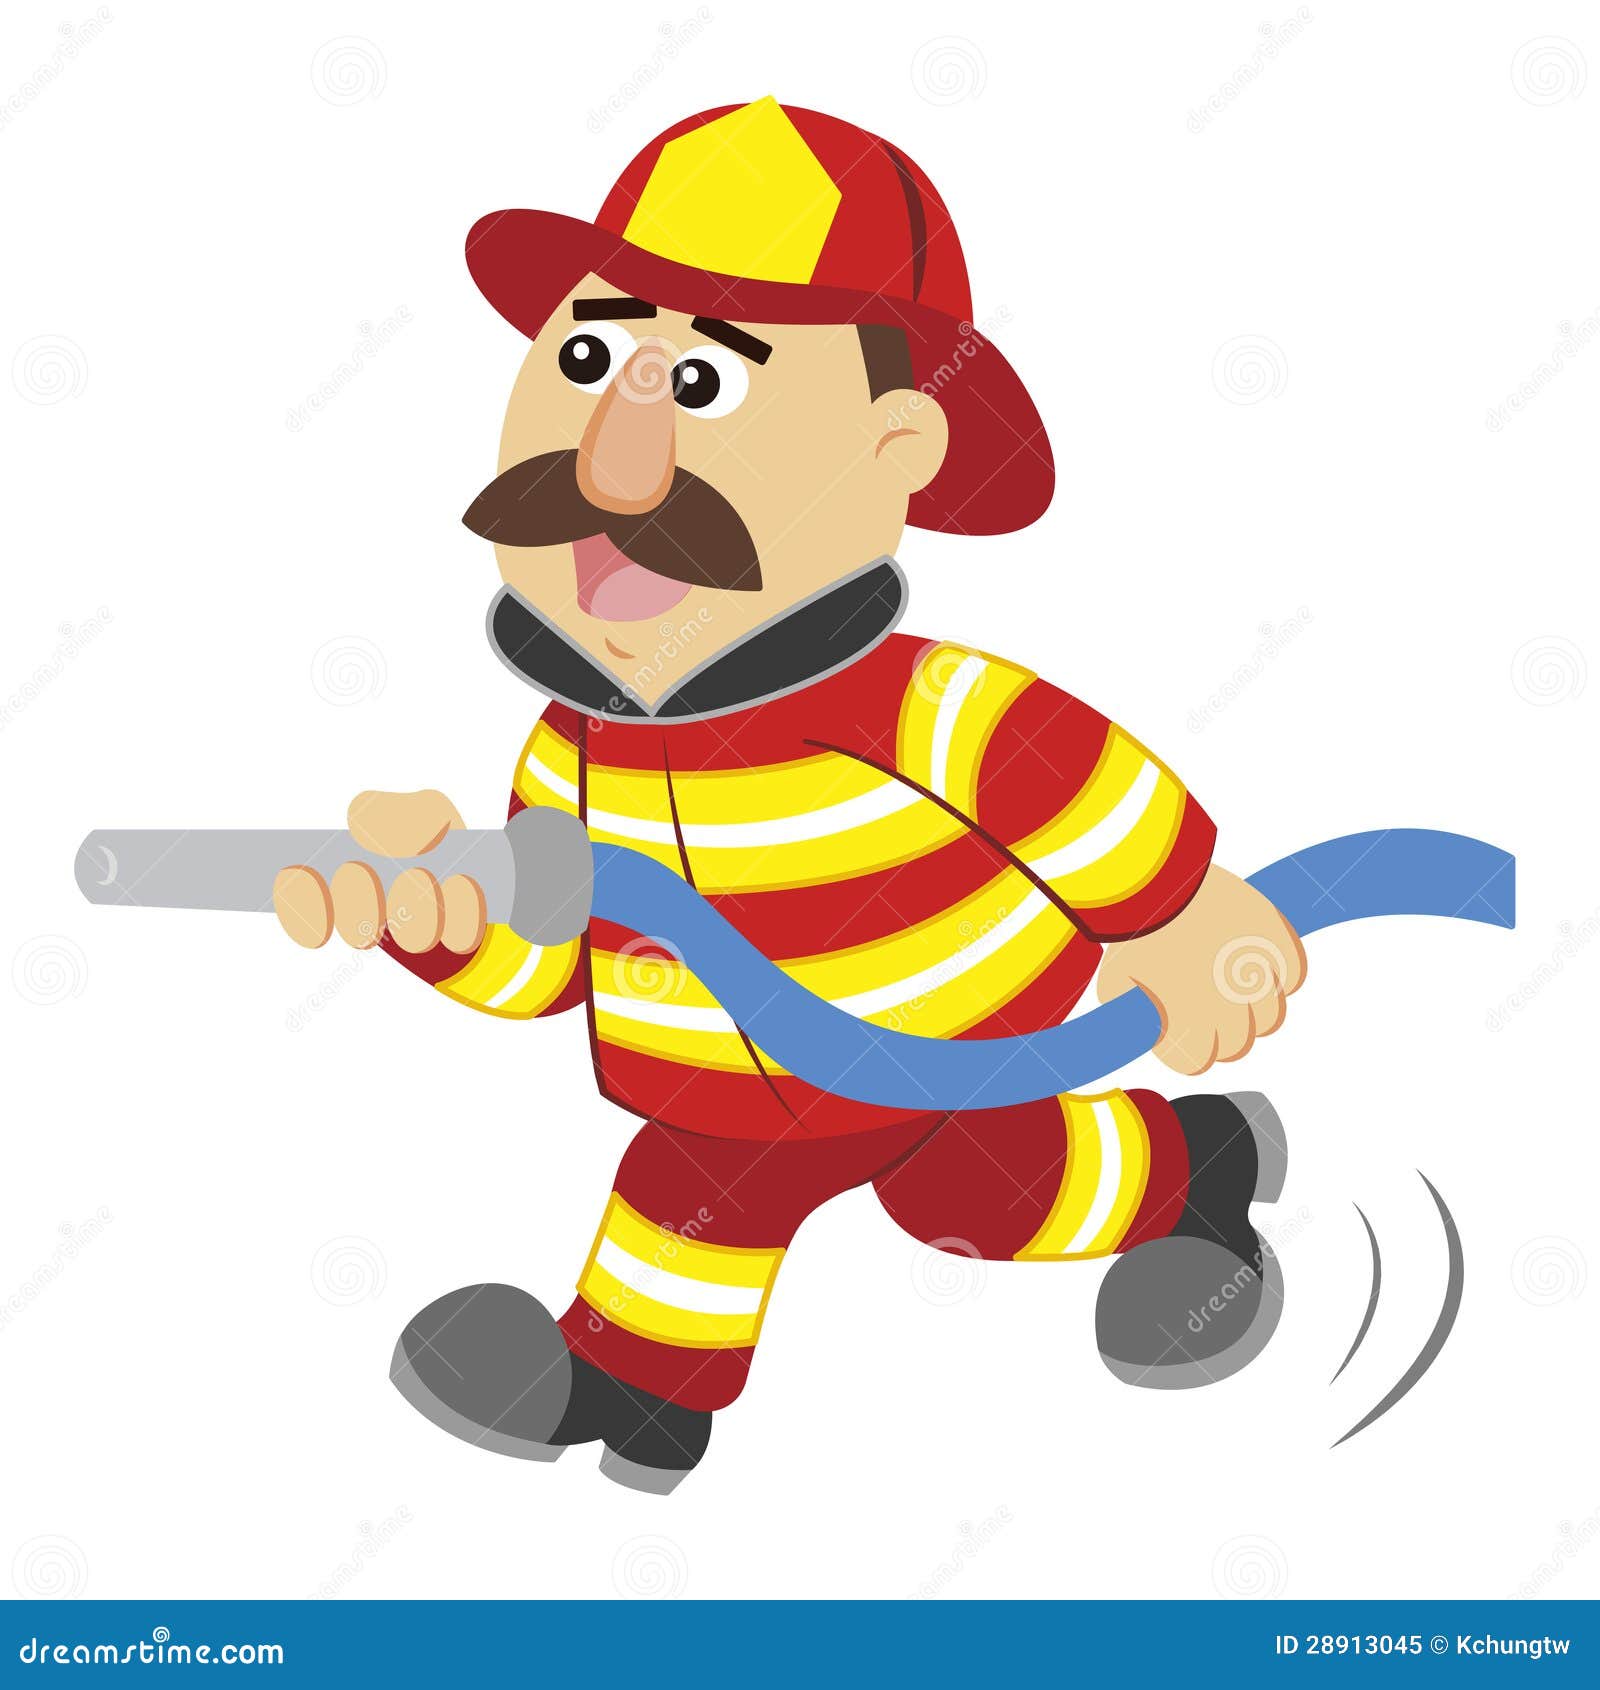 firefighter clipart - photo #46